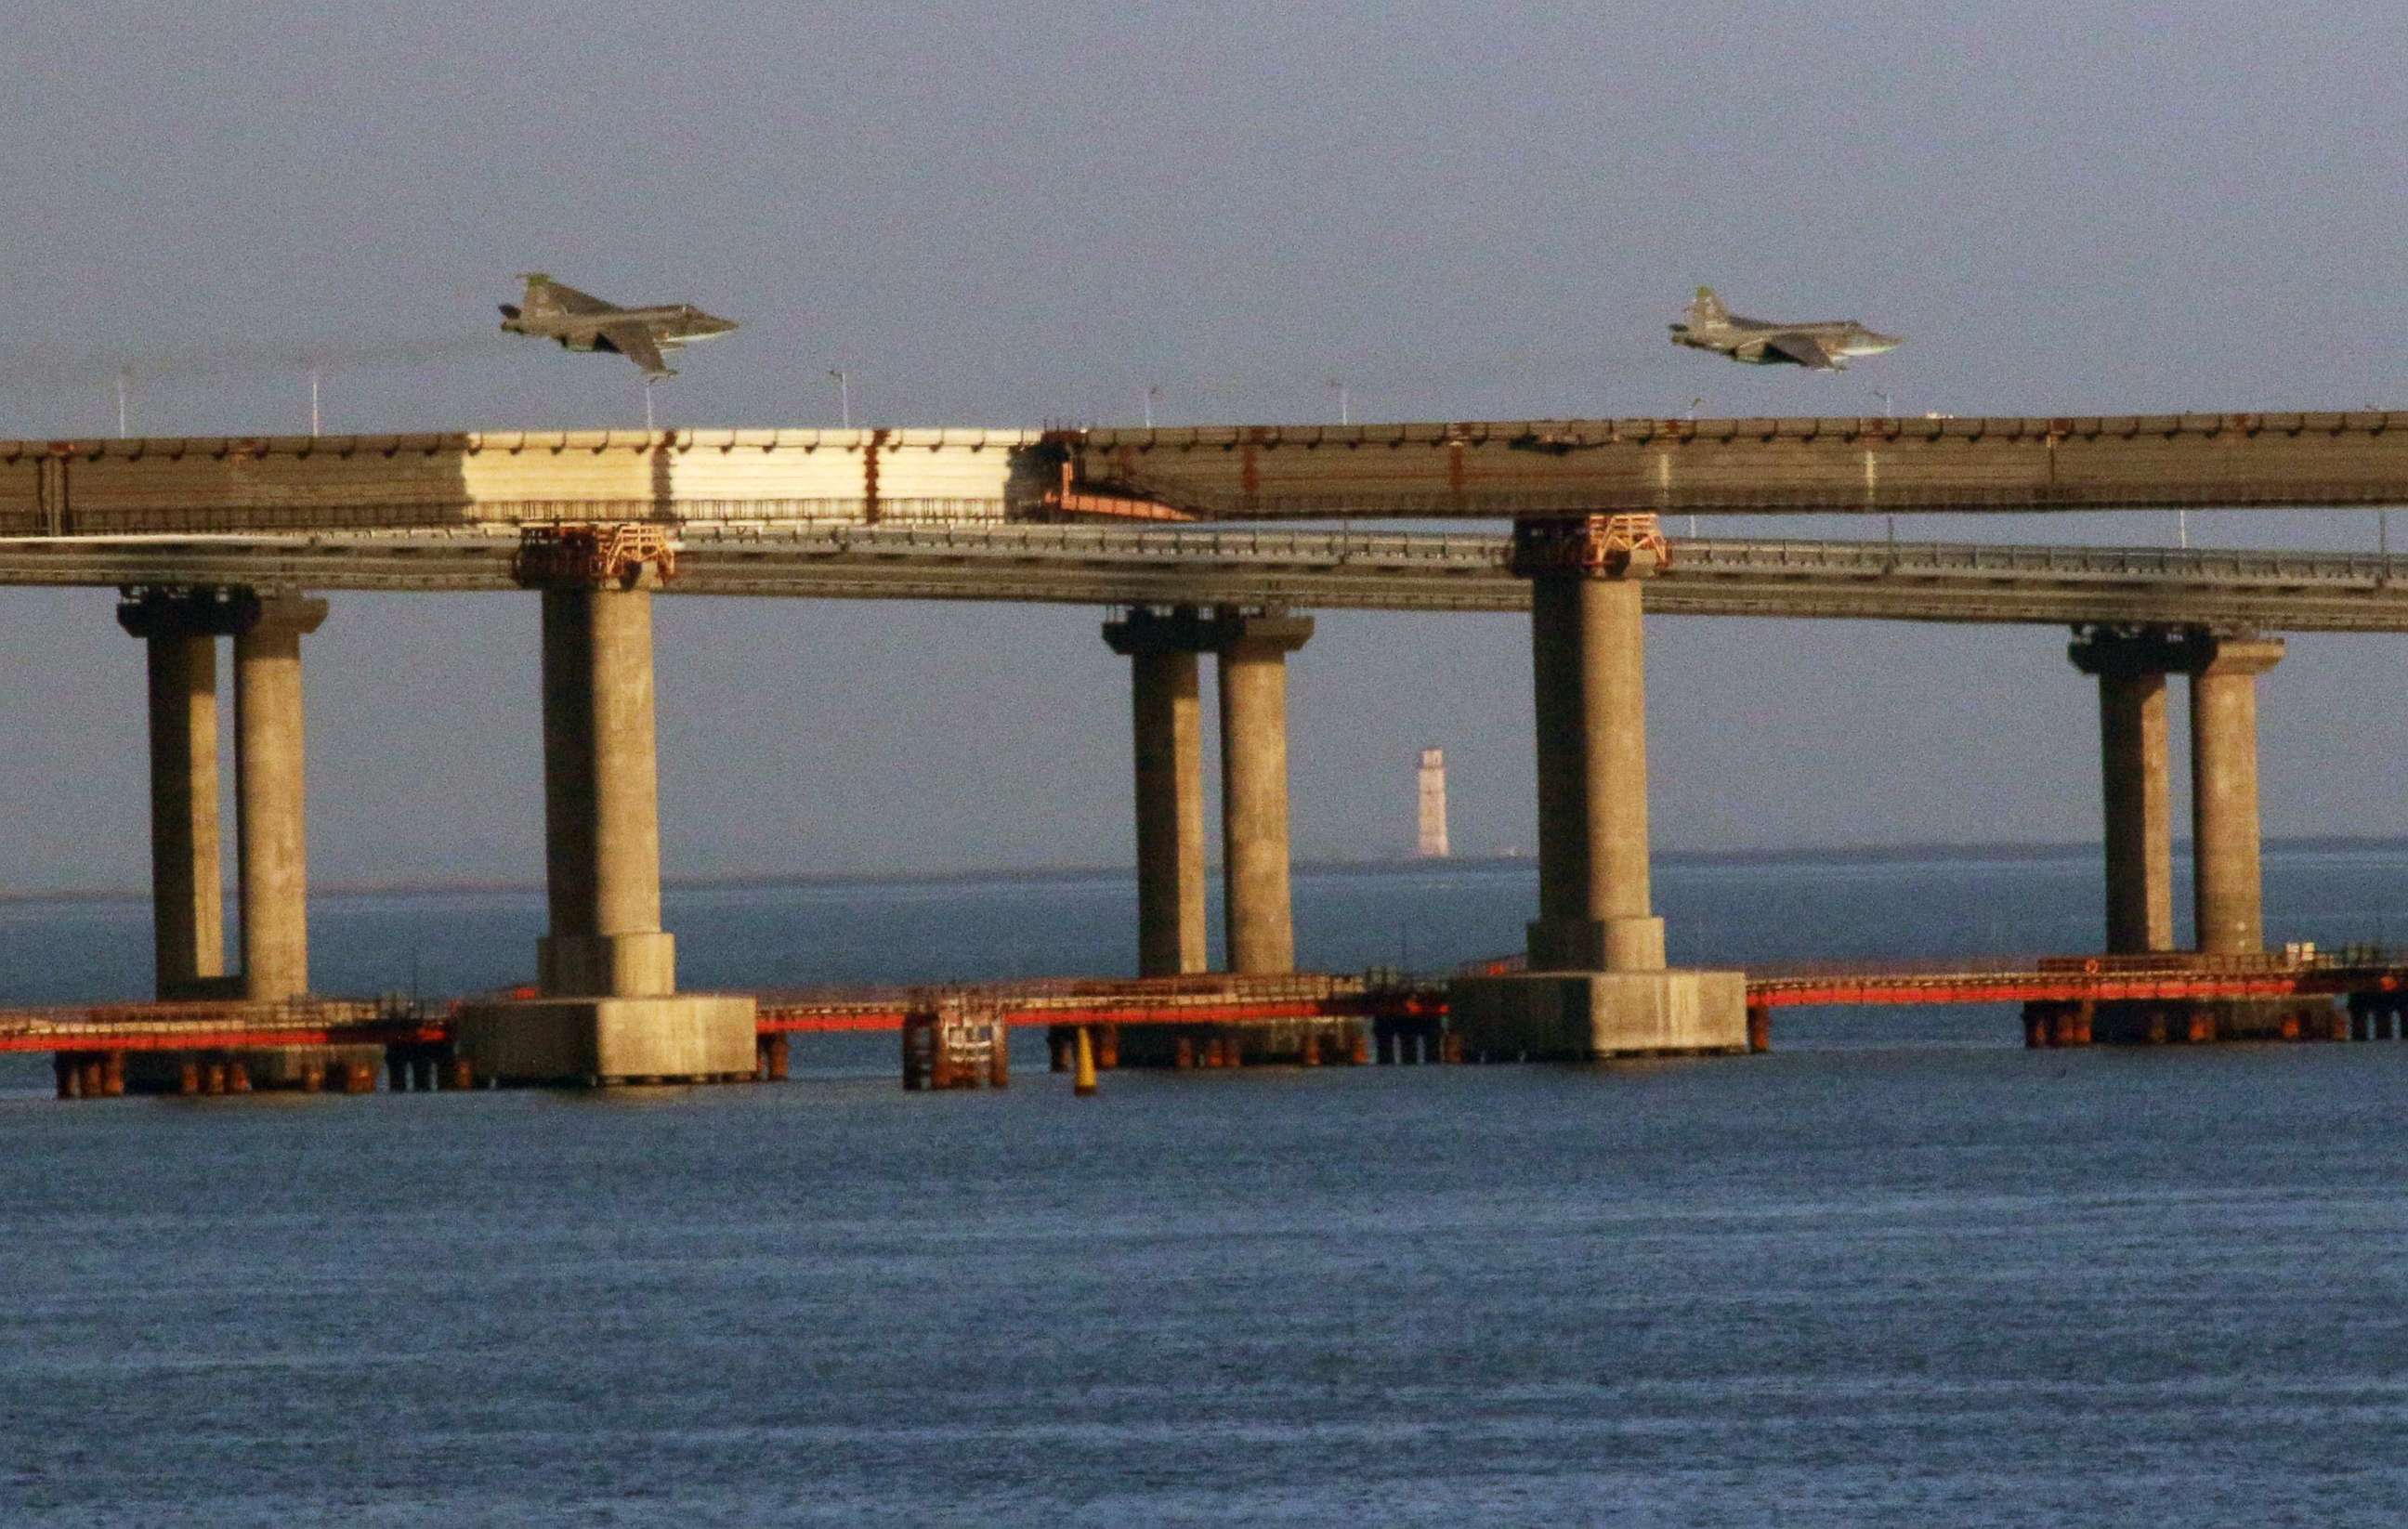 PHOTO: Russian jet fighters fly over a bridge connecting the Russian mainland with the Crimean Peninsula after three Ukrainian navy vessels were stopped by Russia from entering the Sea of Azov via the Kerch Strait in the Black Sea, Crimea, Nov. 25, 2018.